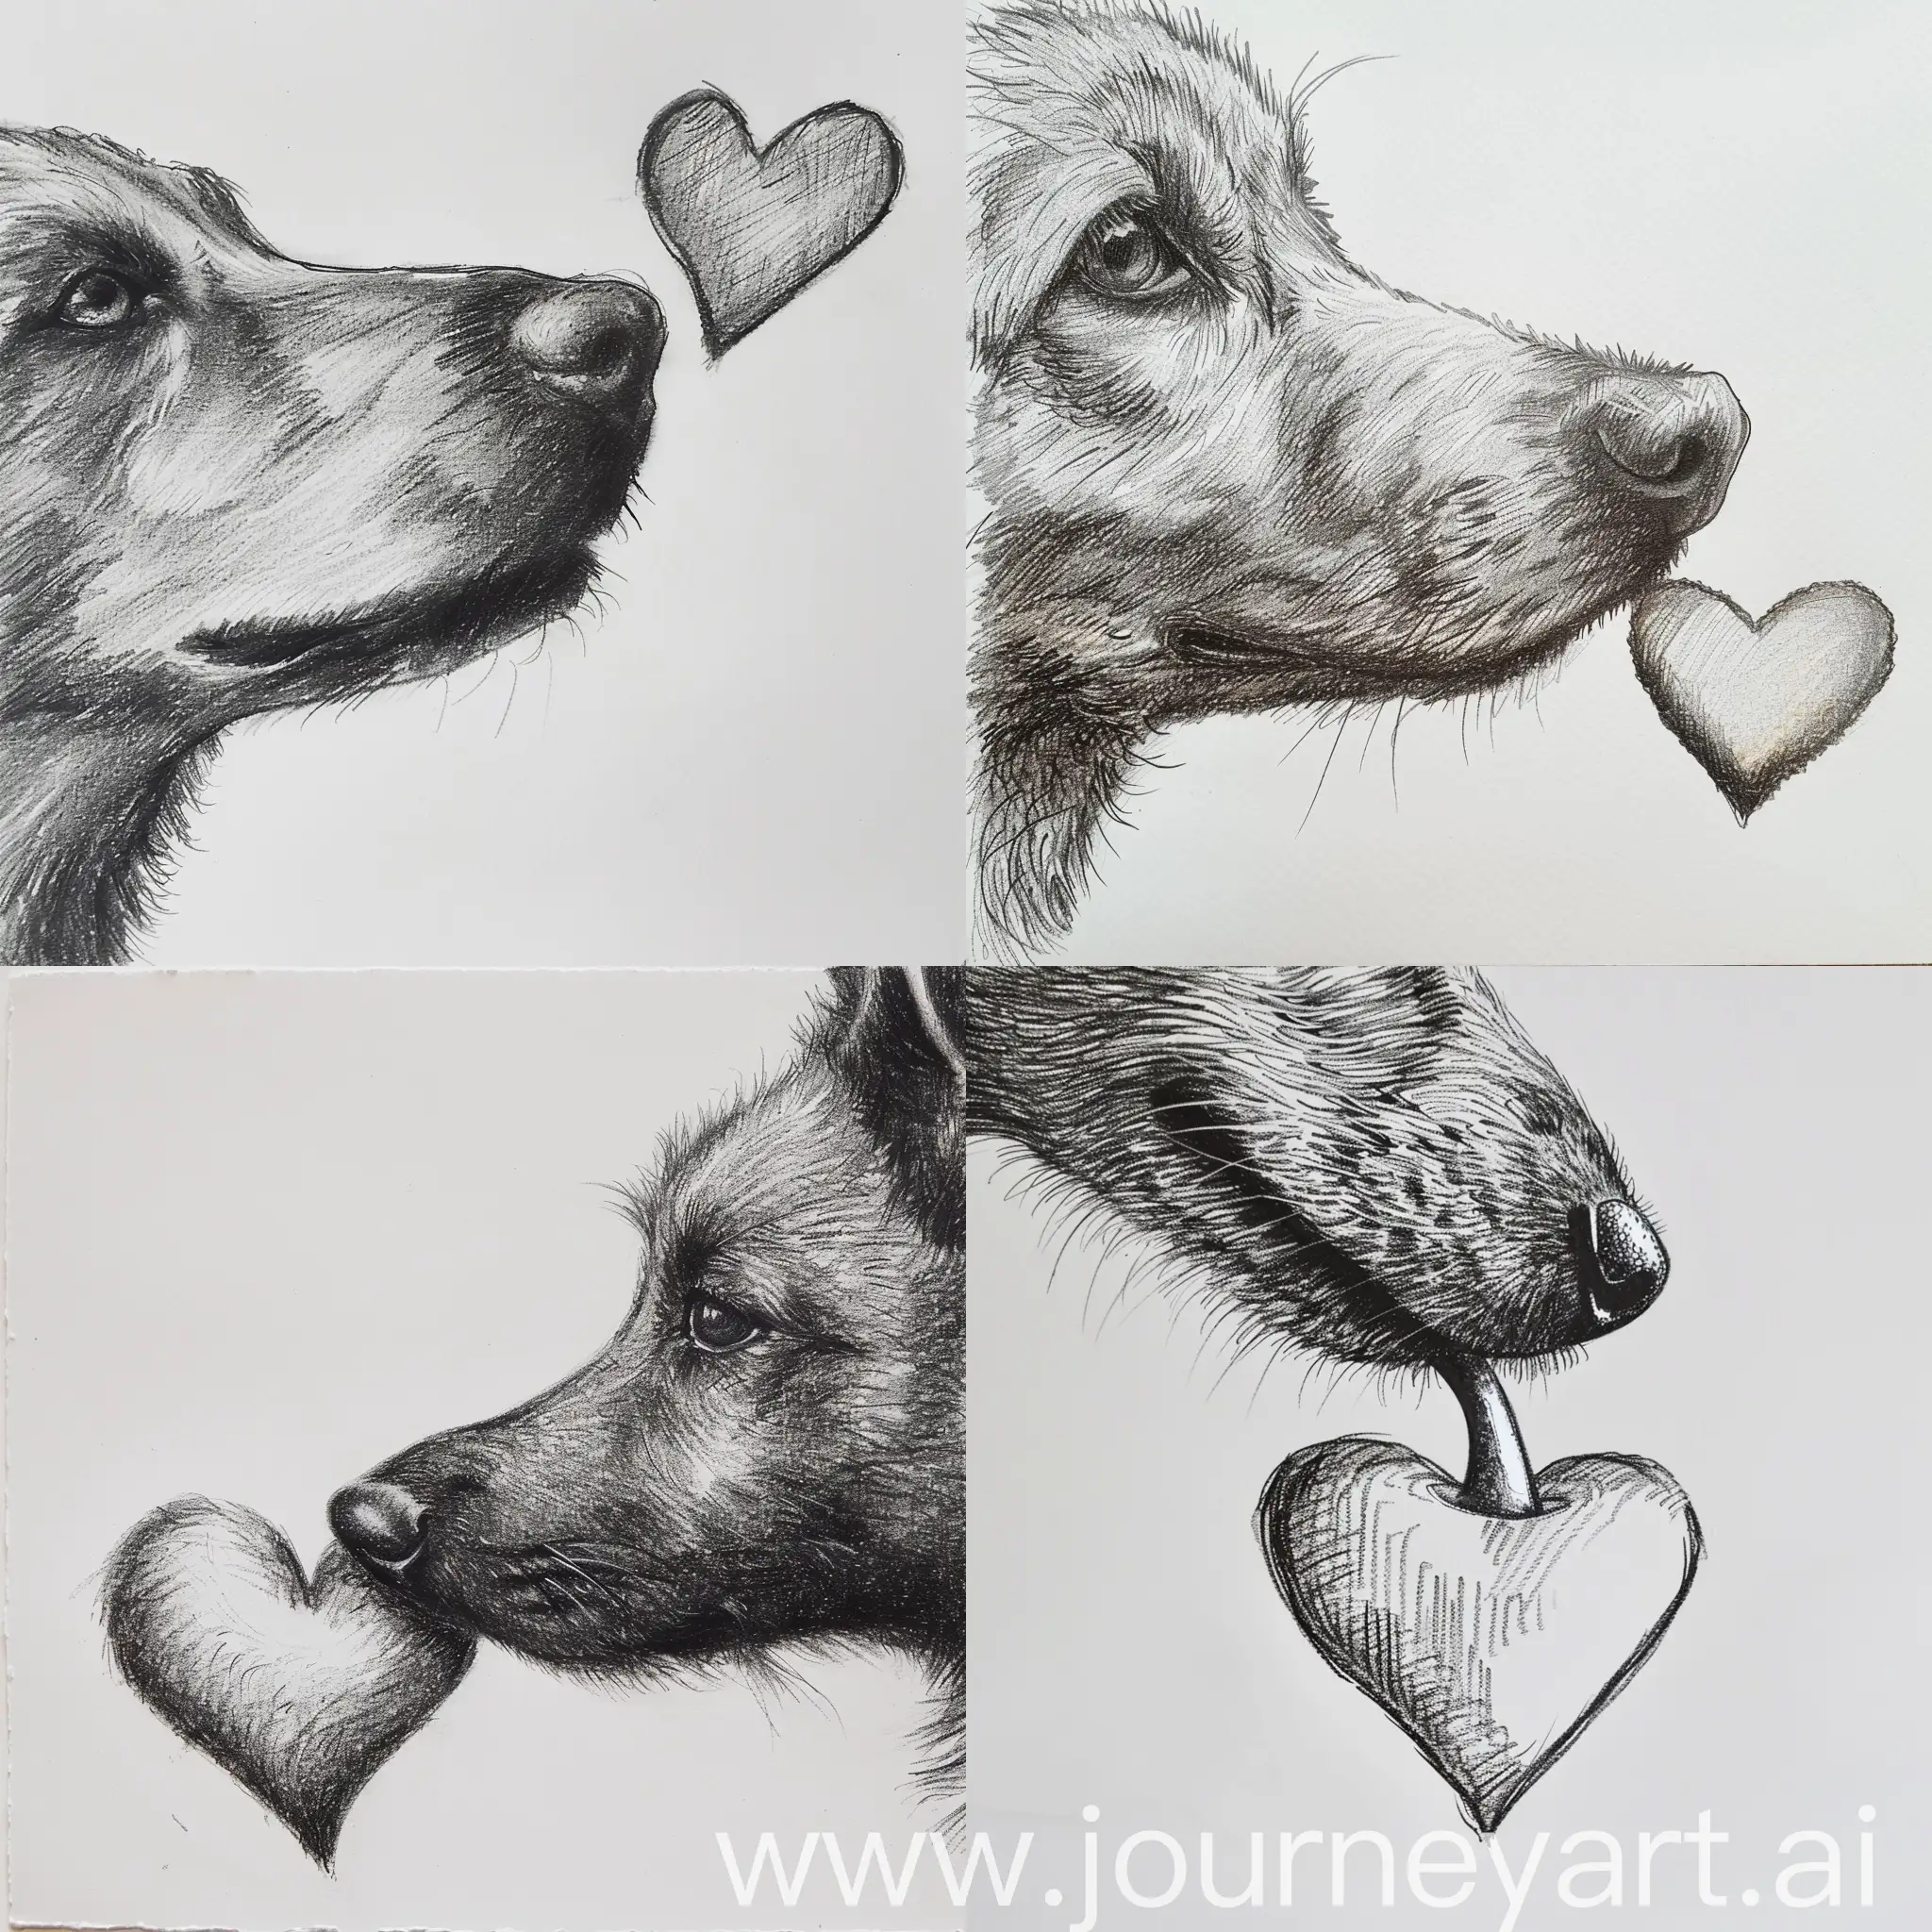 A drowing of a dog nose tuching a heart